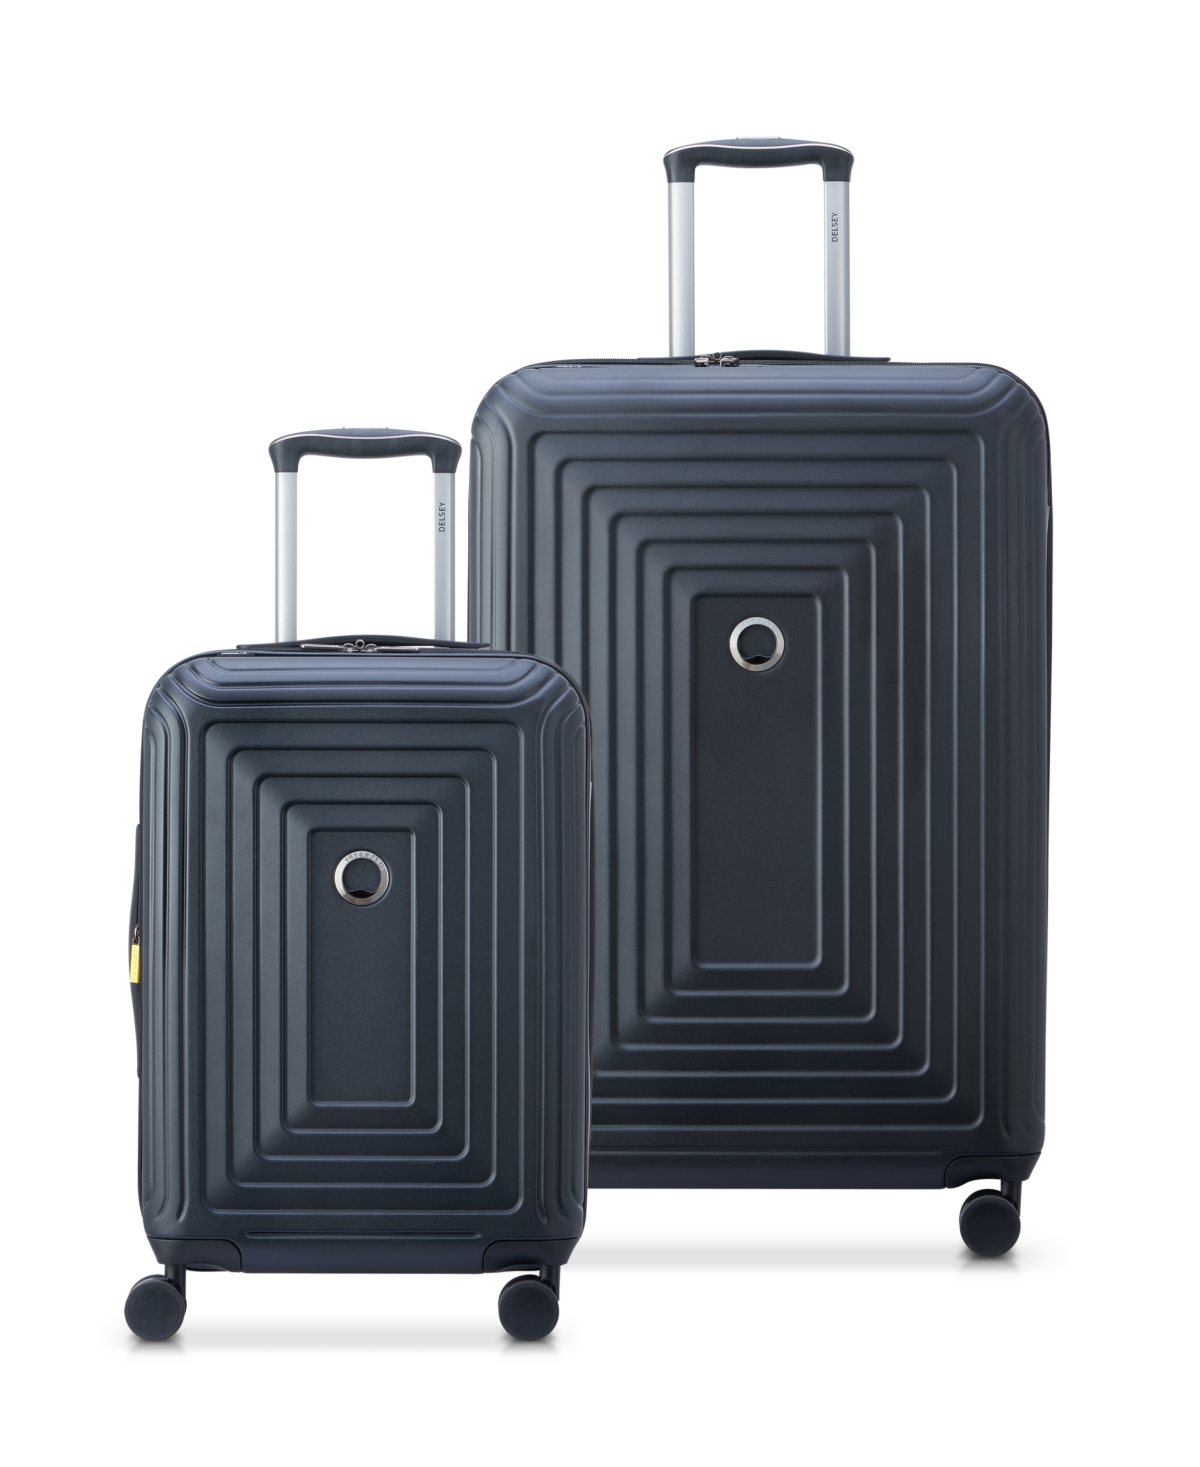 Corsica 2 Piece Hardside Luggage Set, Carry-On and 27" Spinner - Glossy Bronze